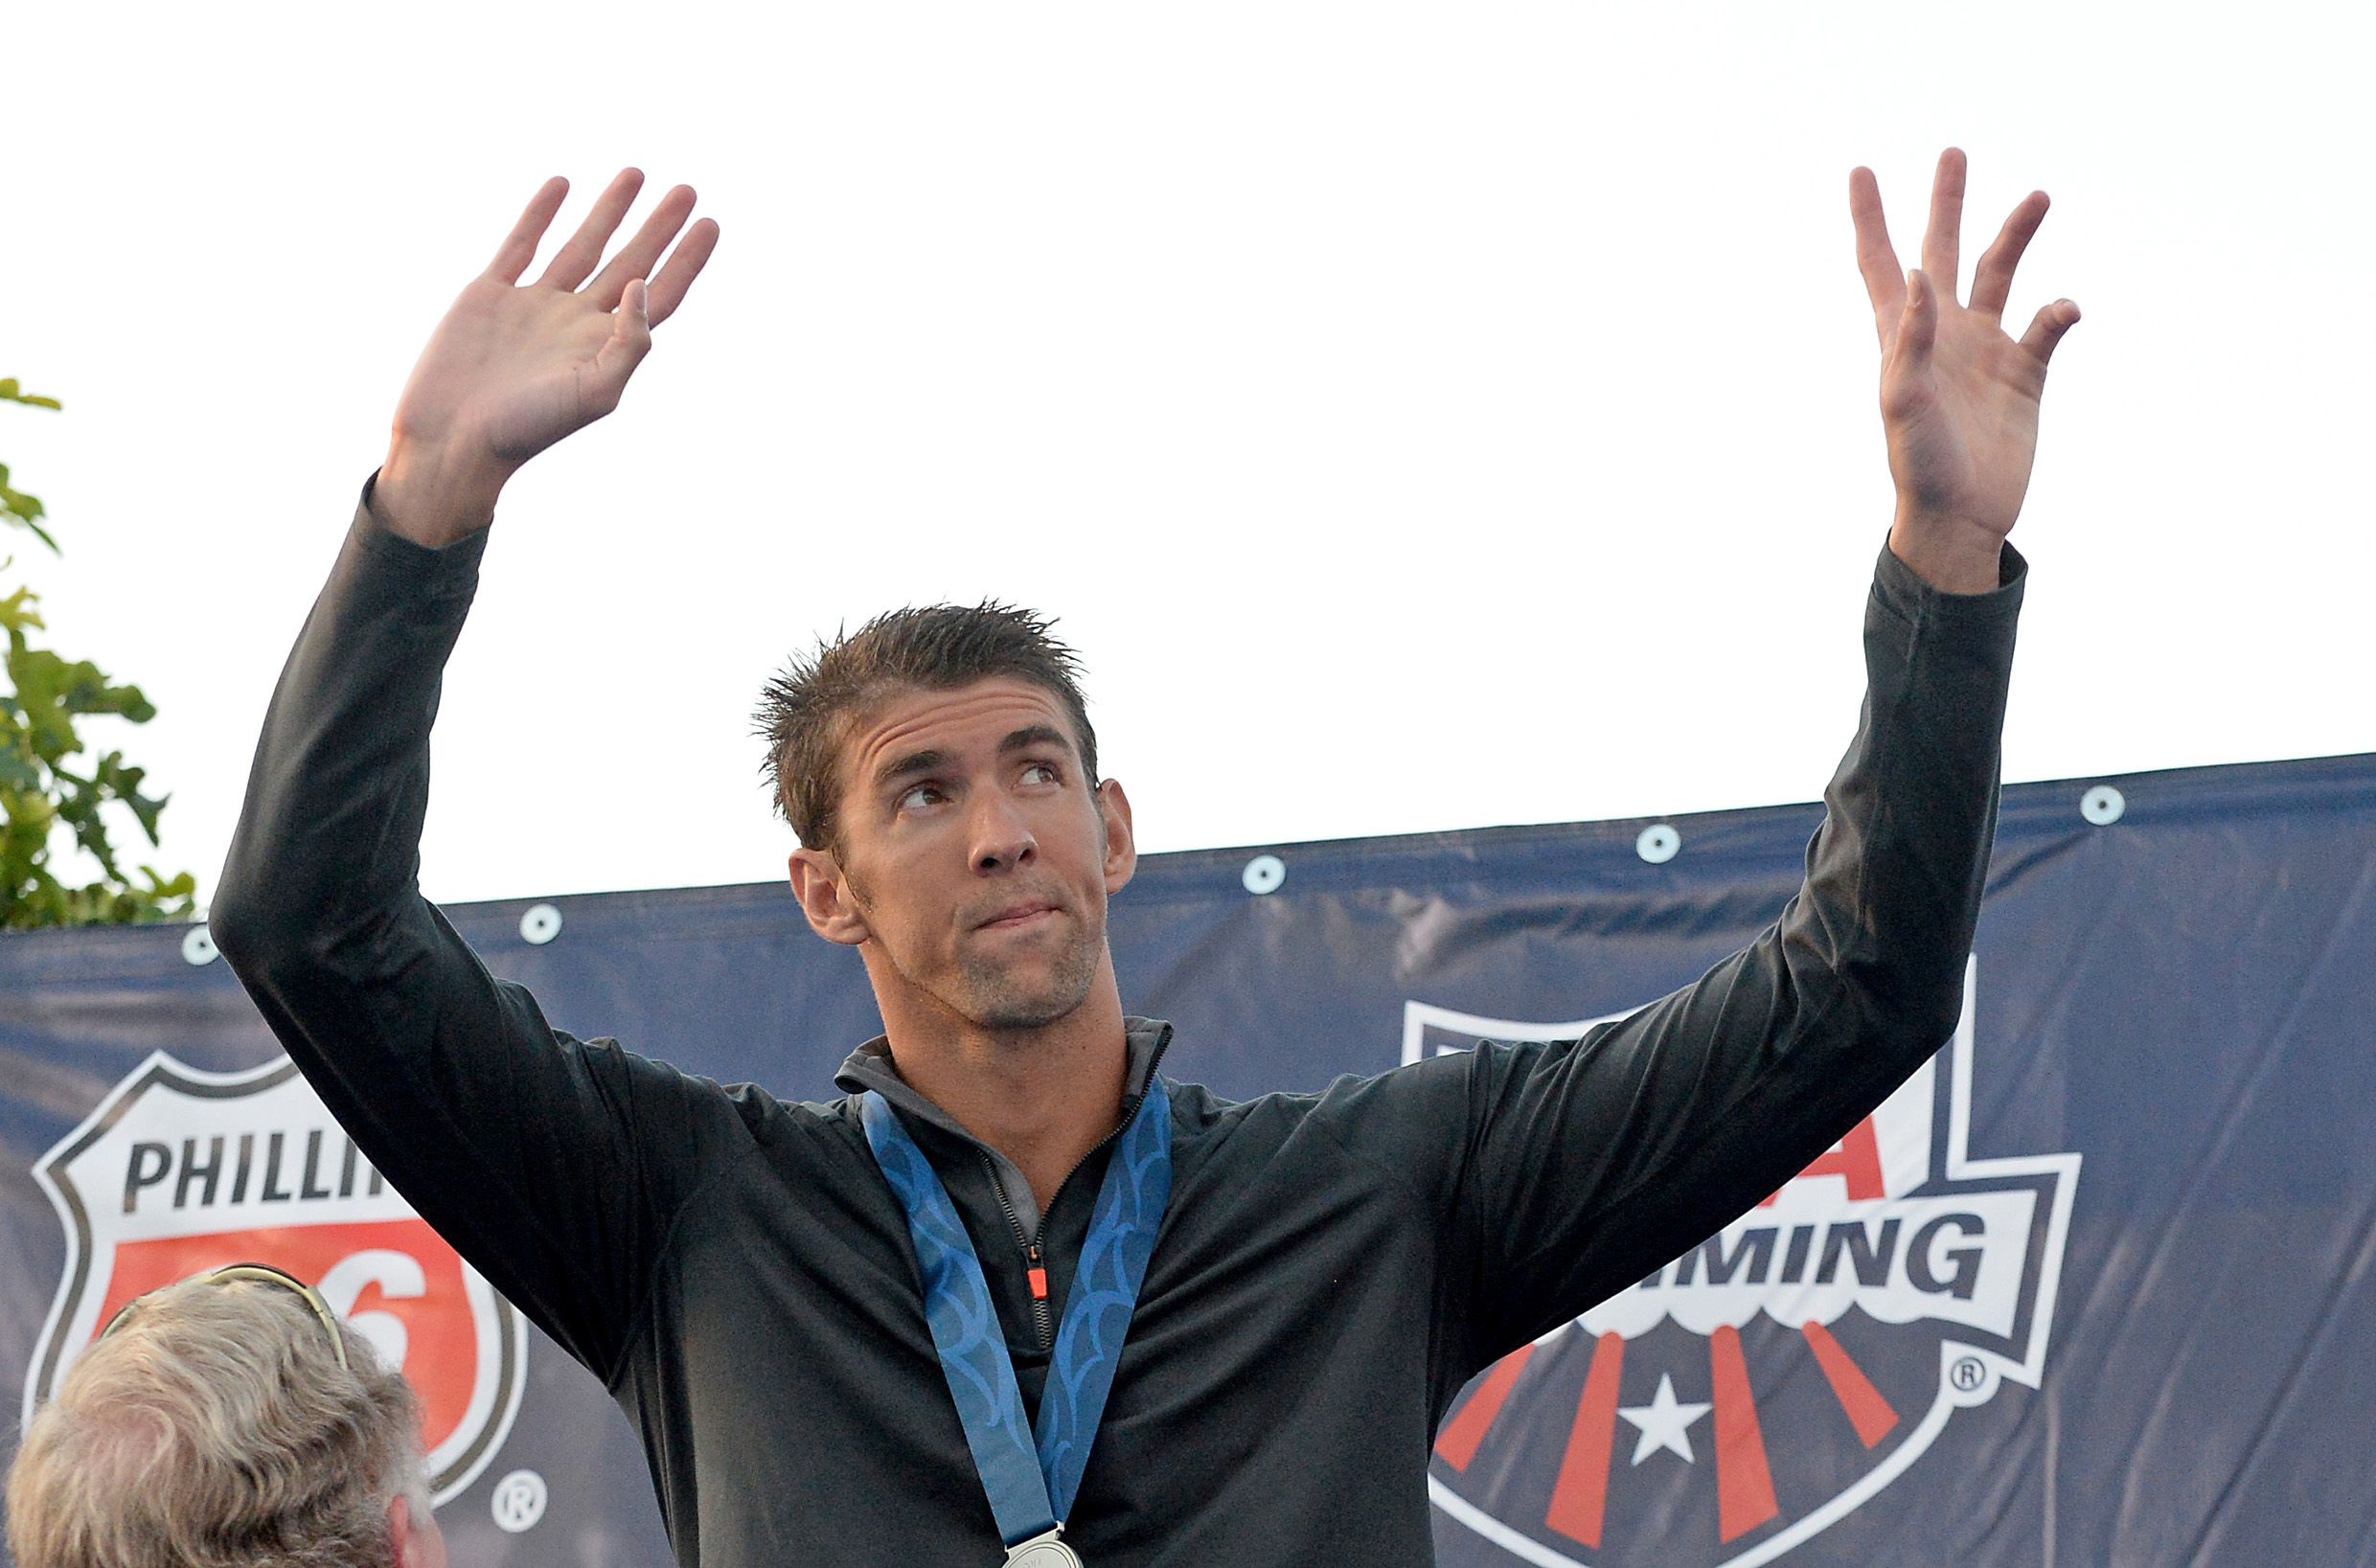 Michael Phelps Taking Time Off From Sports To Attend Help Program After Second Dui Arrest [tweets]